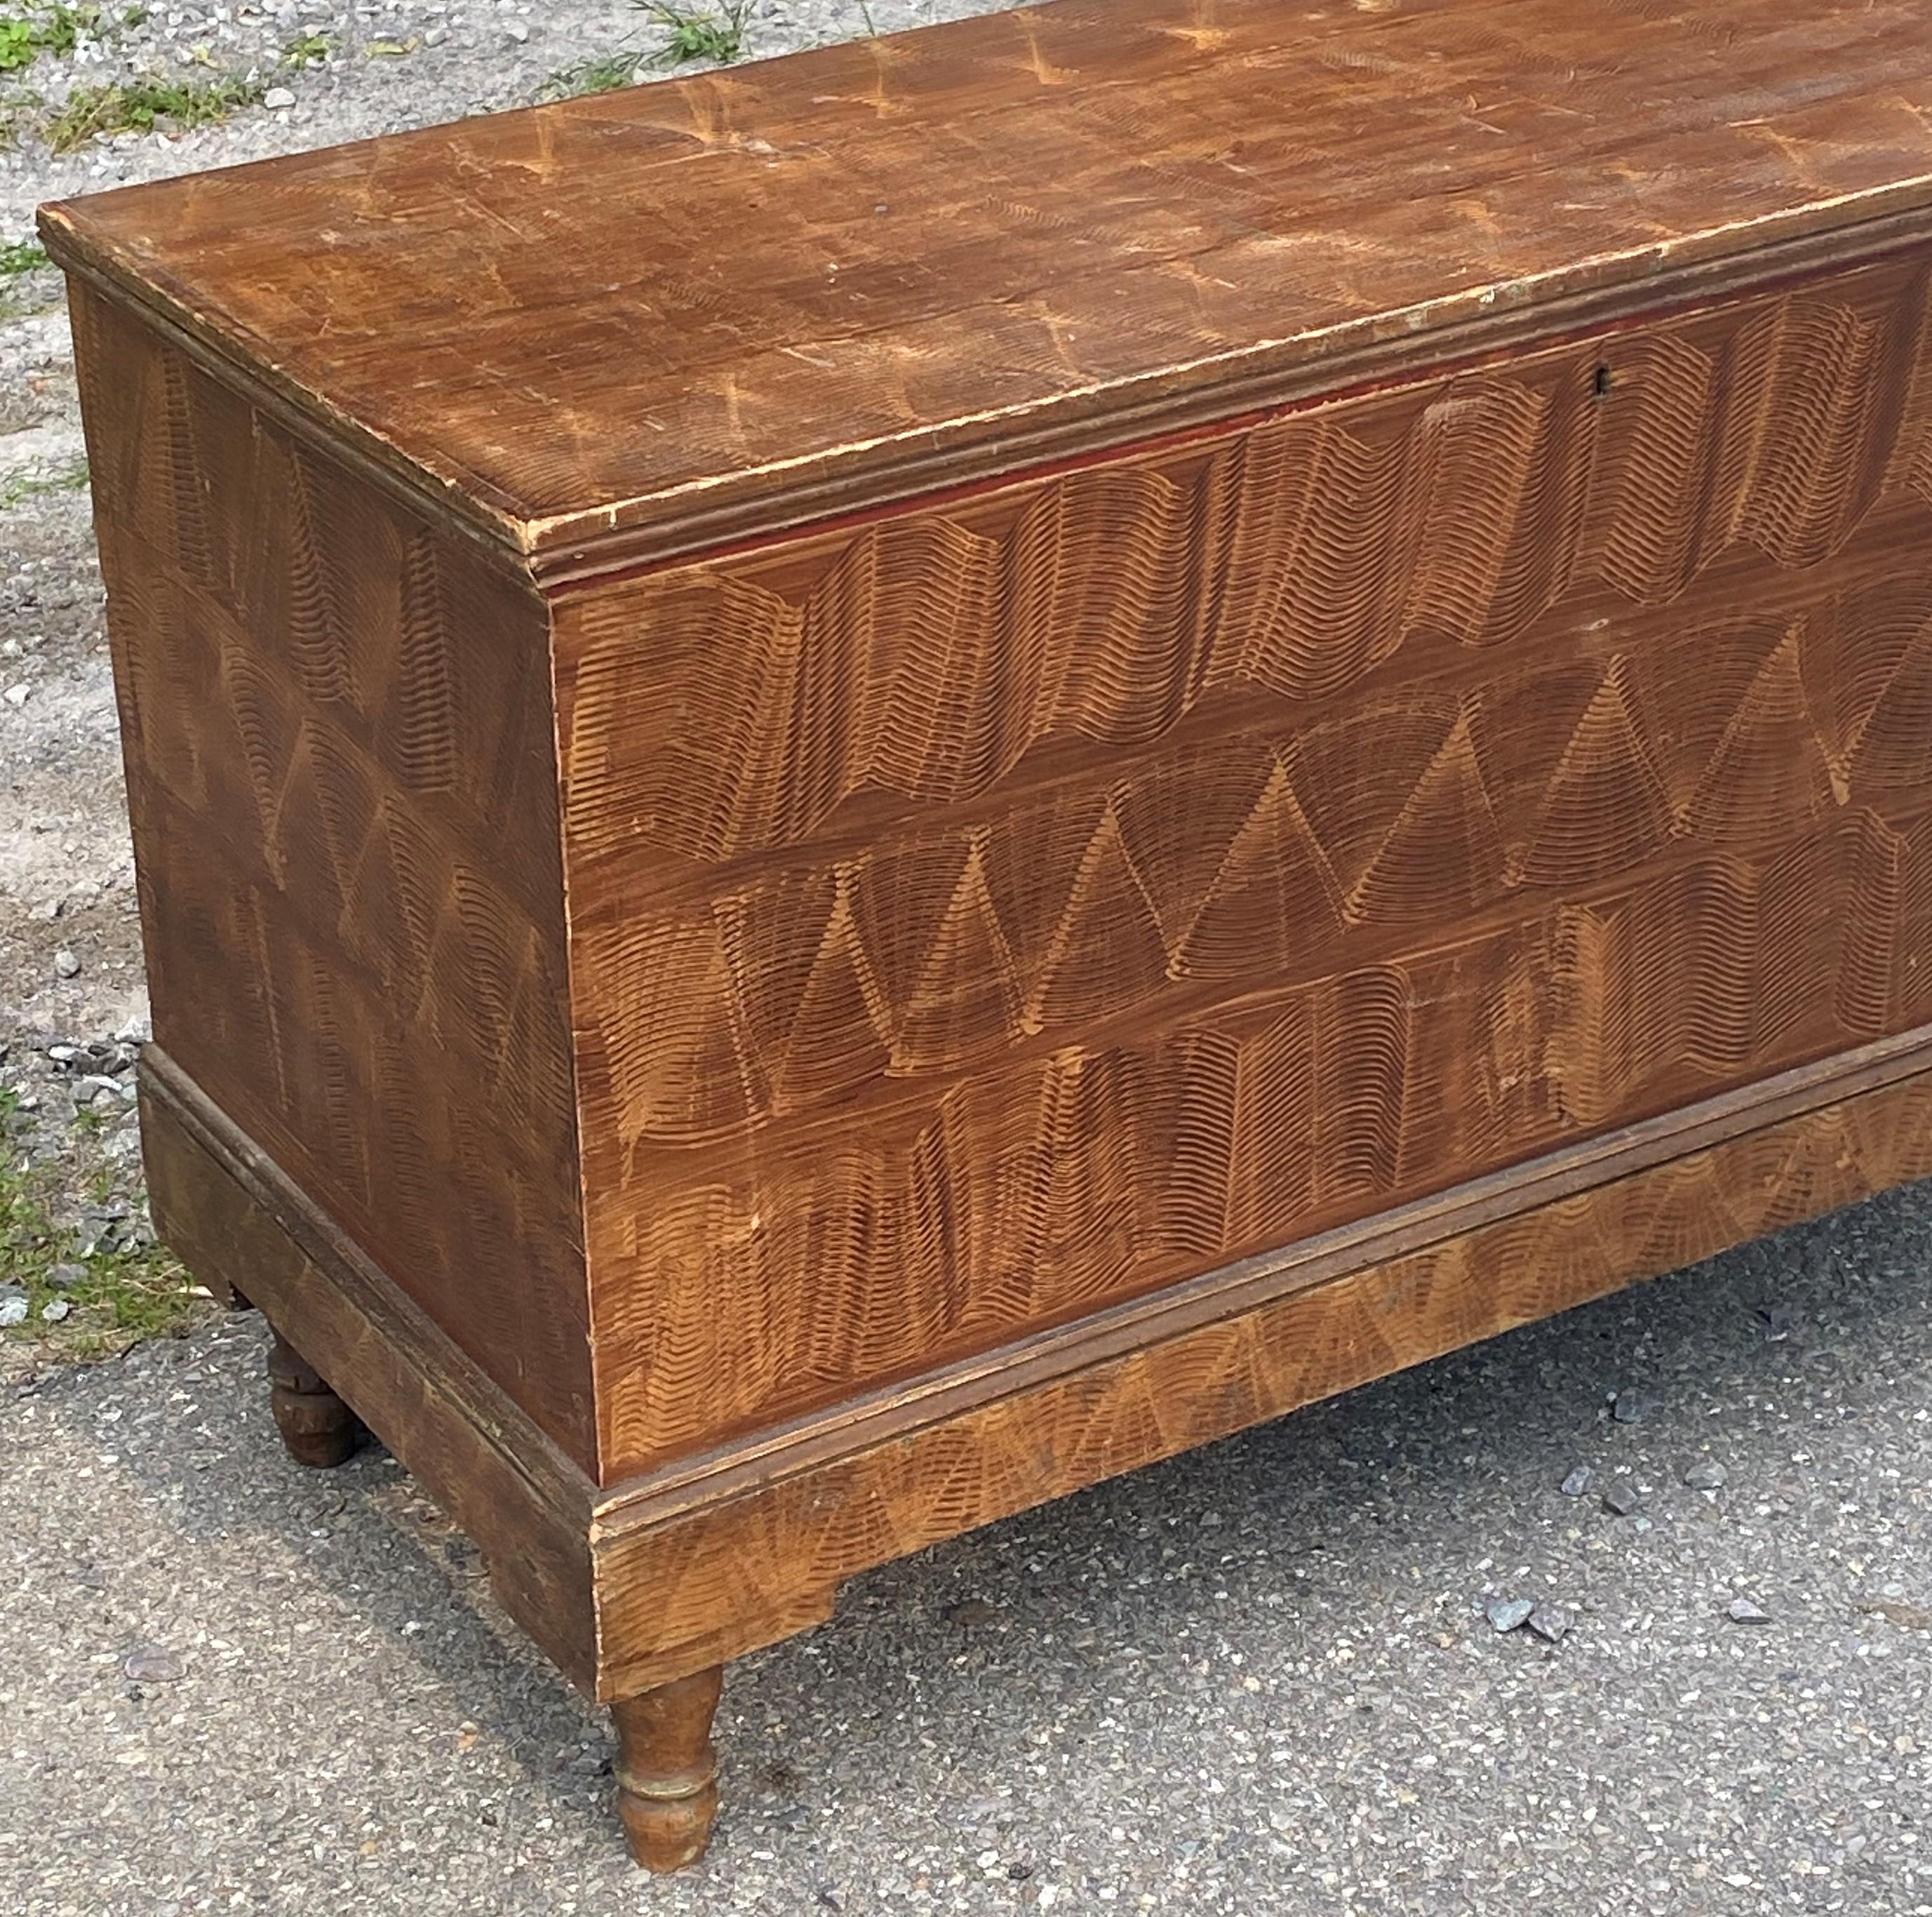 Wonderful grained PA blanket box, well crafted and with original turned feet, attributed to a specific area of PA, likey Montgomery county. Note cover of well is walnut-otherwide all poplar.